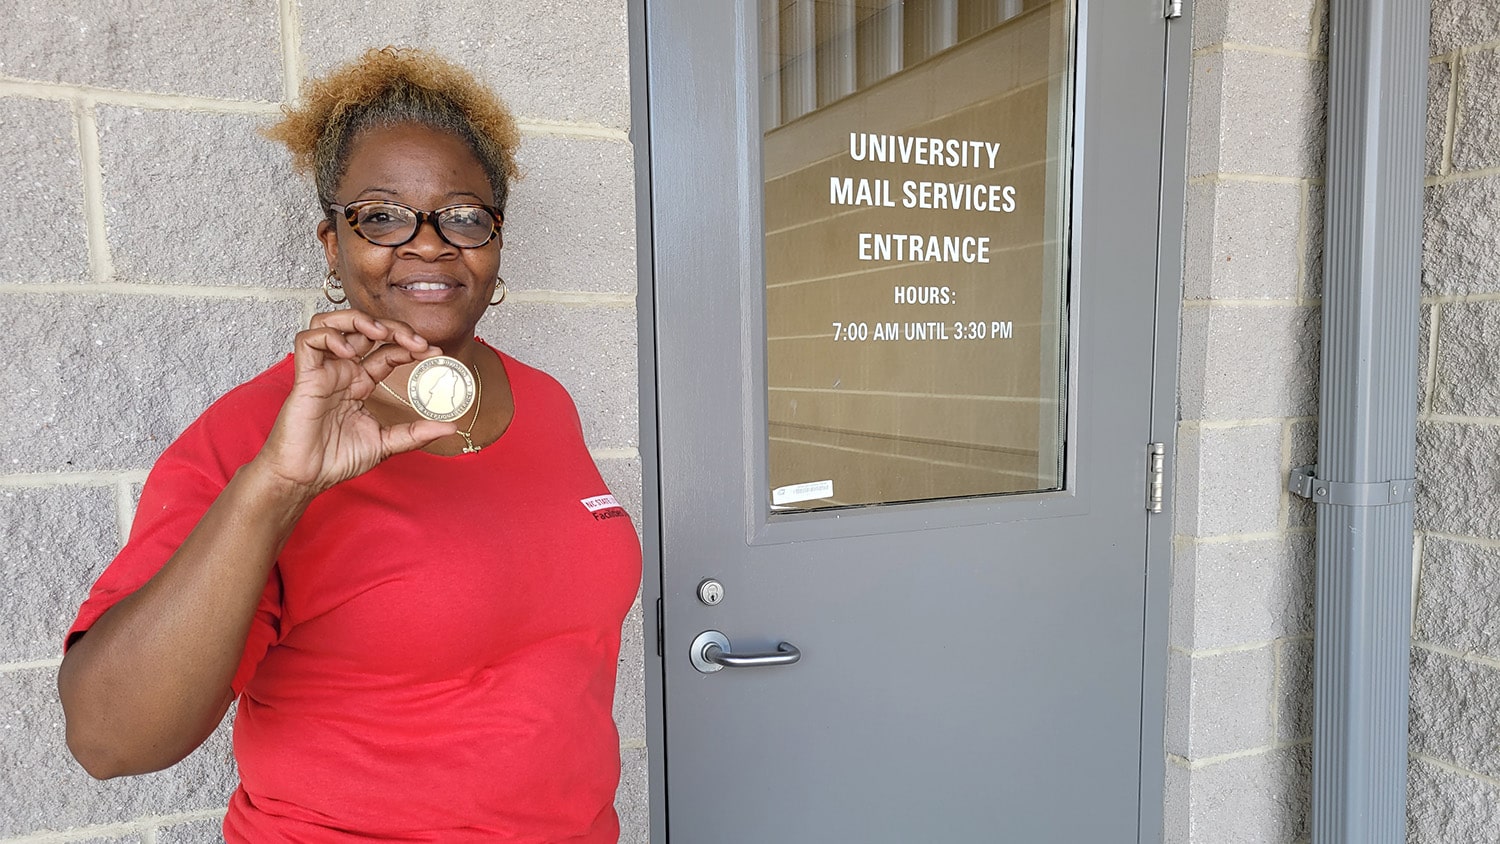 Ebony Leggett holds up her Facilities Coin for Exceptional Service next to the door for the Mail Services office.